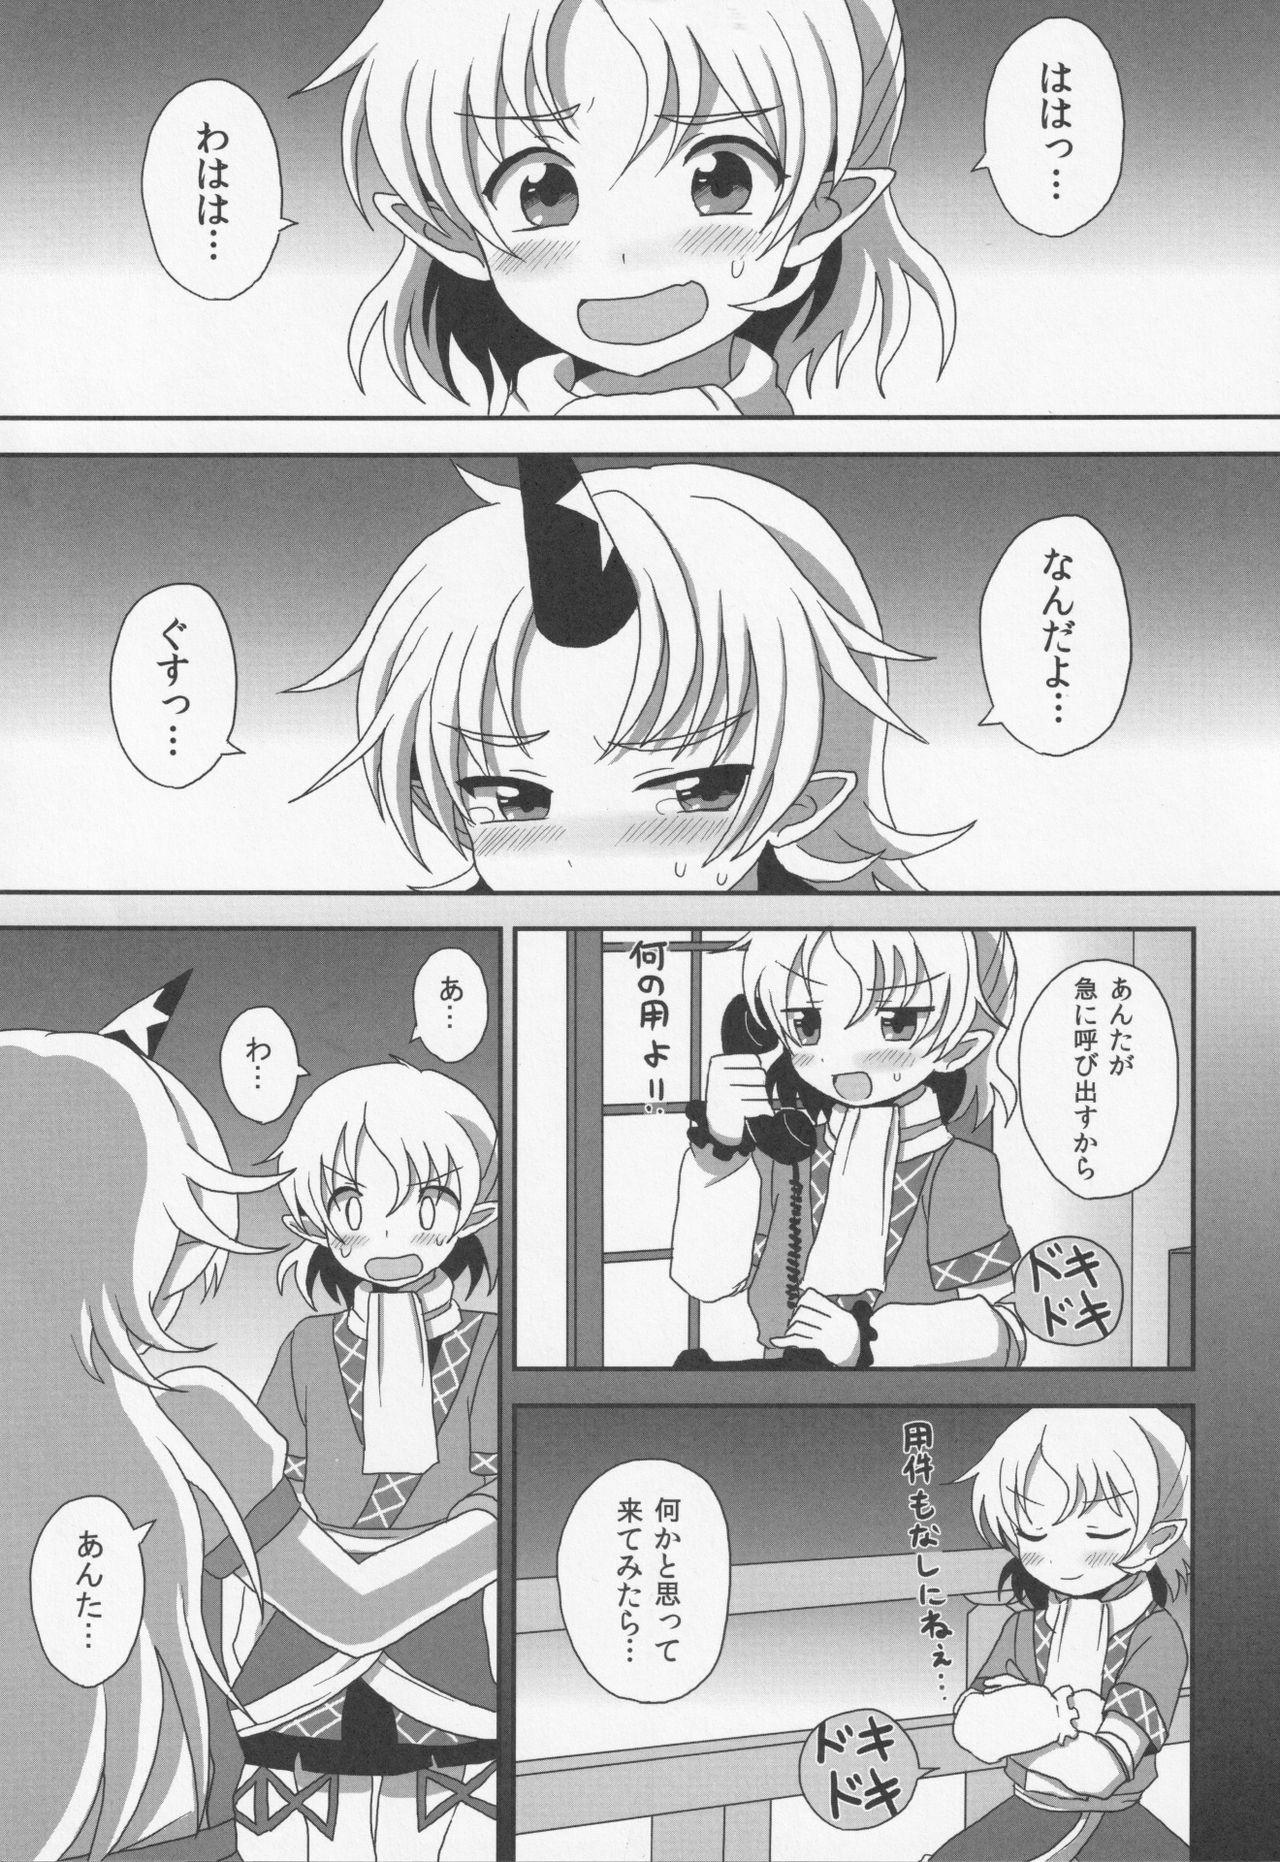 Licking Pussy (C80) [Bottle Syrup (Inaho)] -Kyuuto de Watashi to Tsukiatte- (Touhou Project) - Touhou project Africa - Page 4